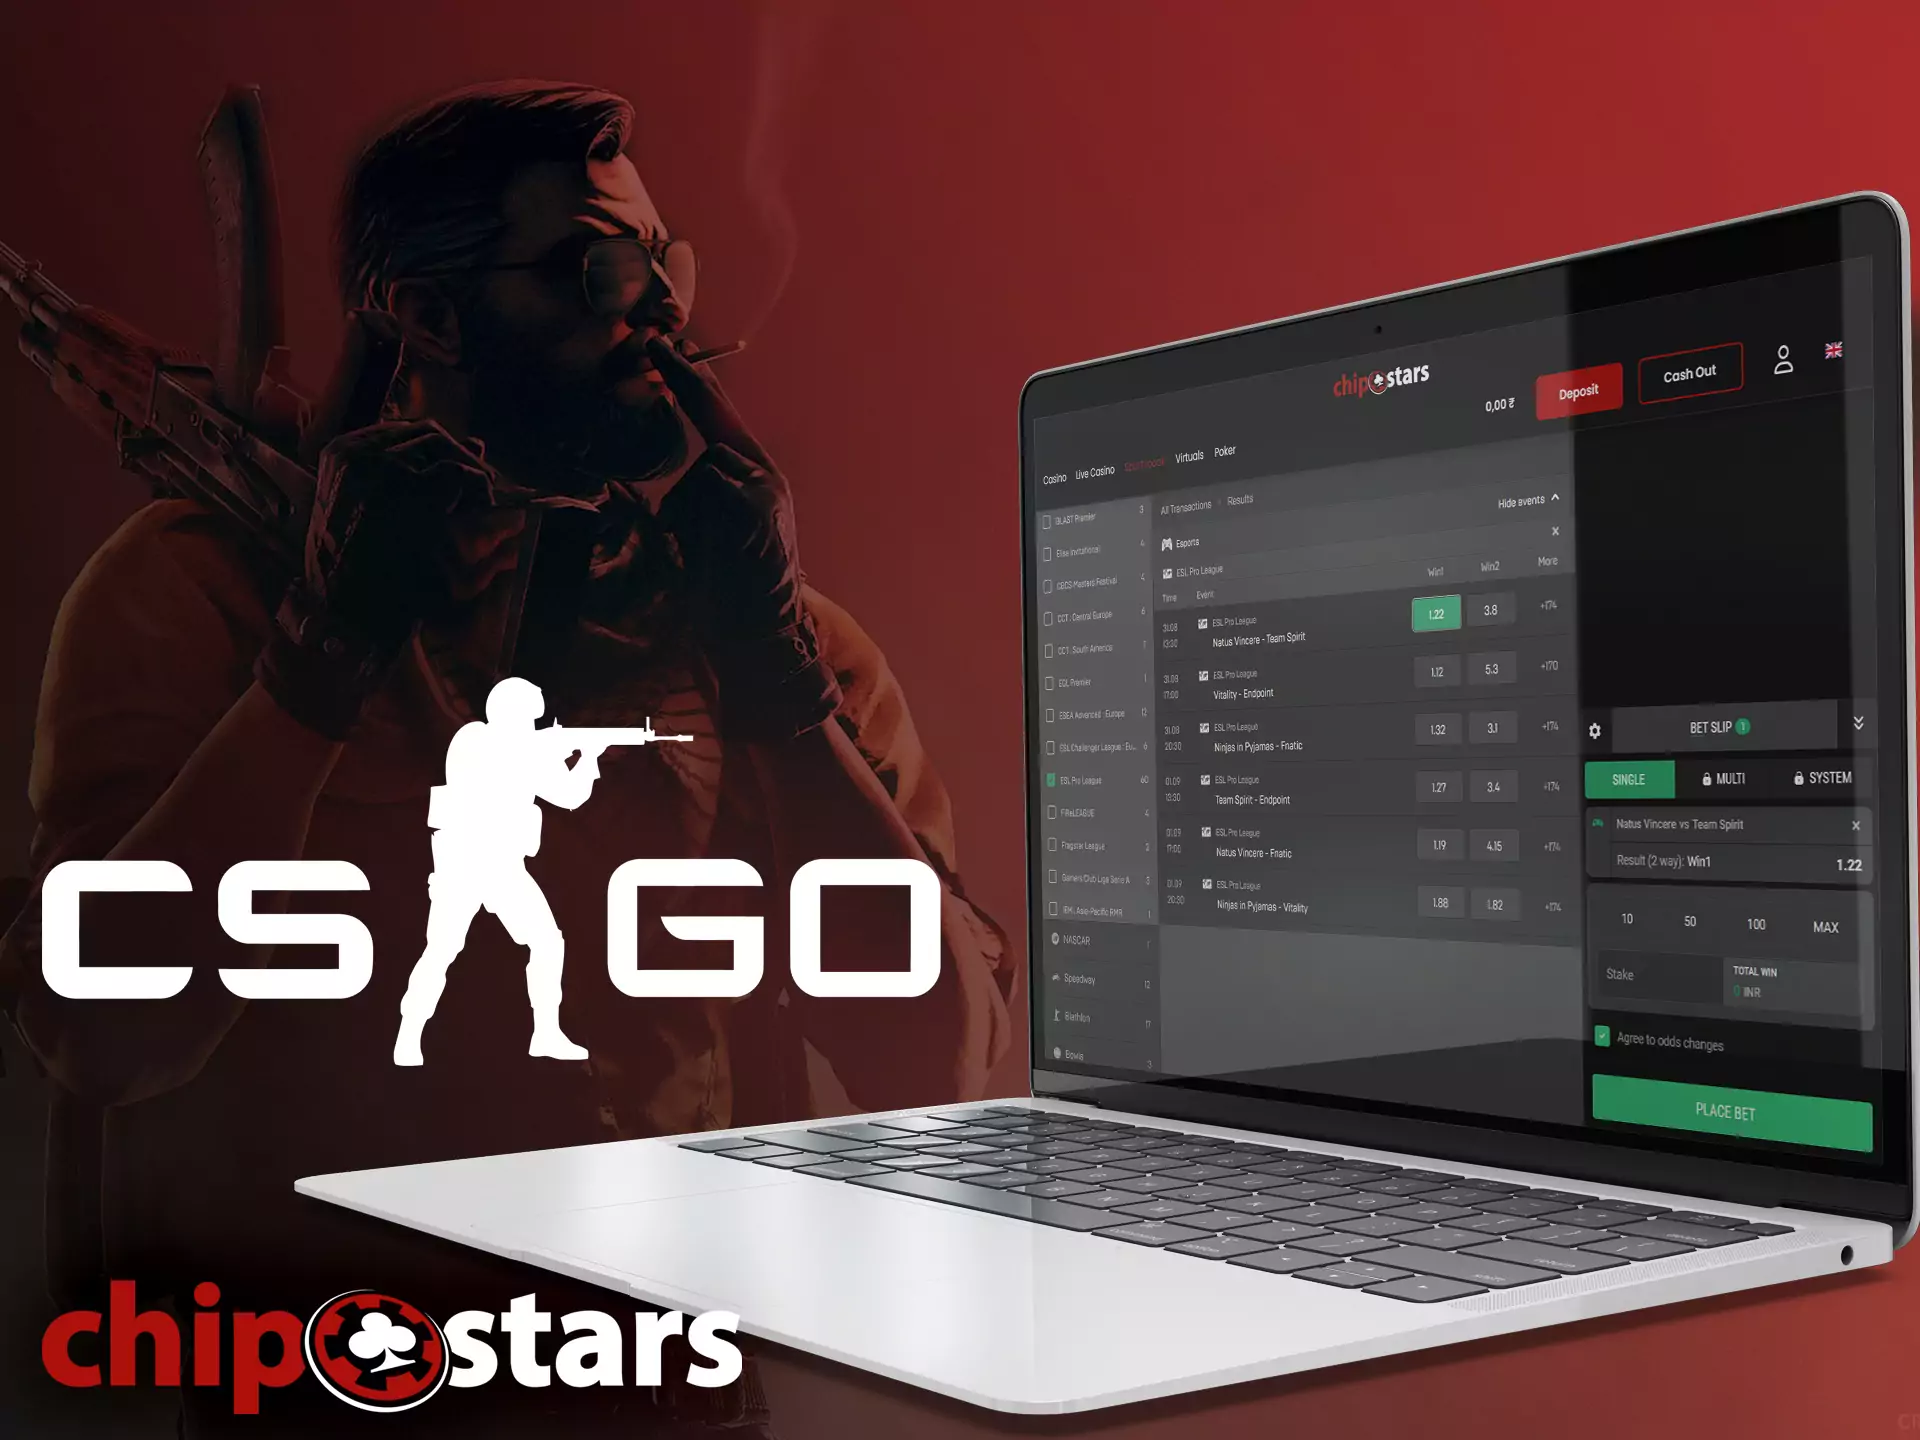 On the Chipstars site, you can place bets on CS:GO matches online.